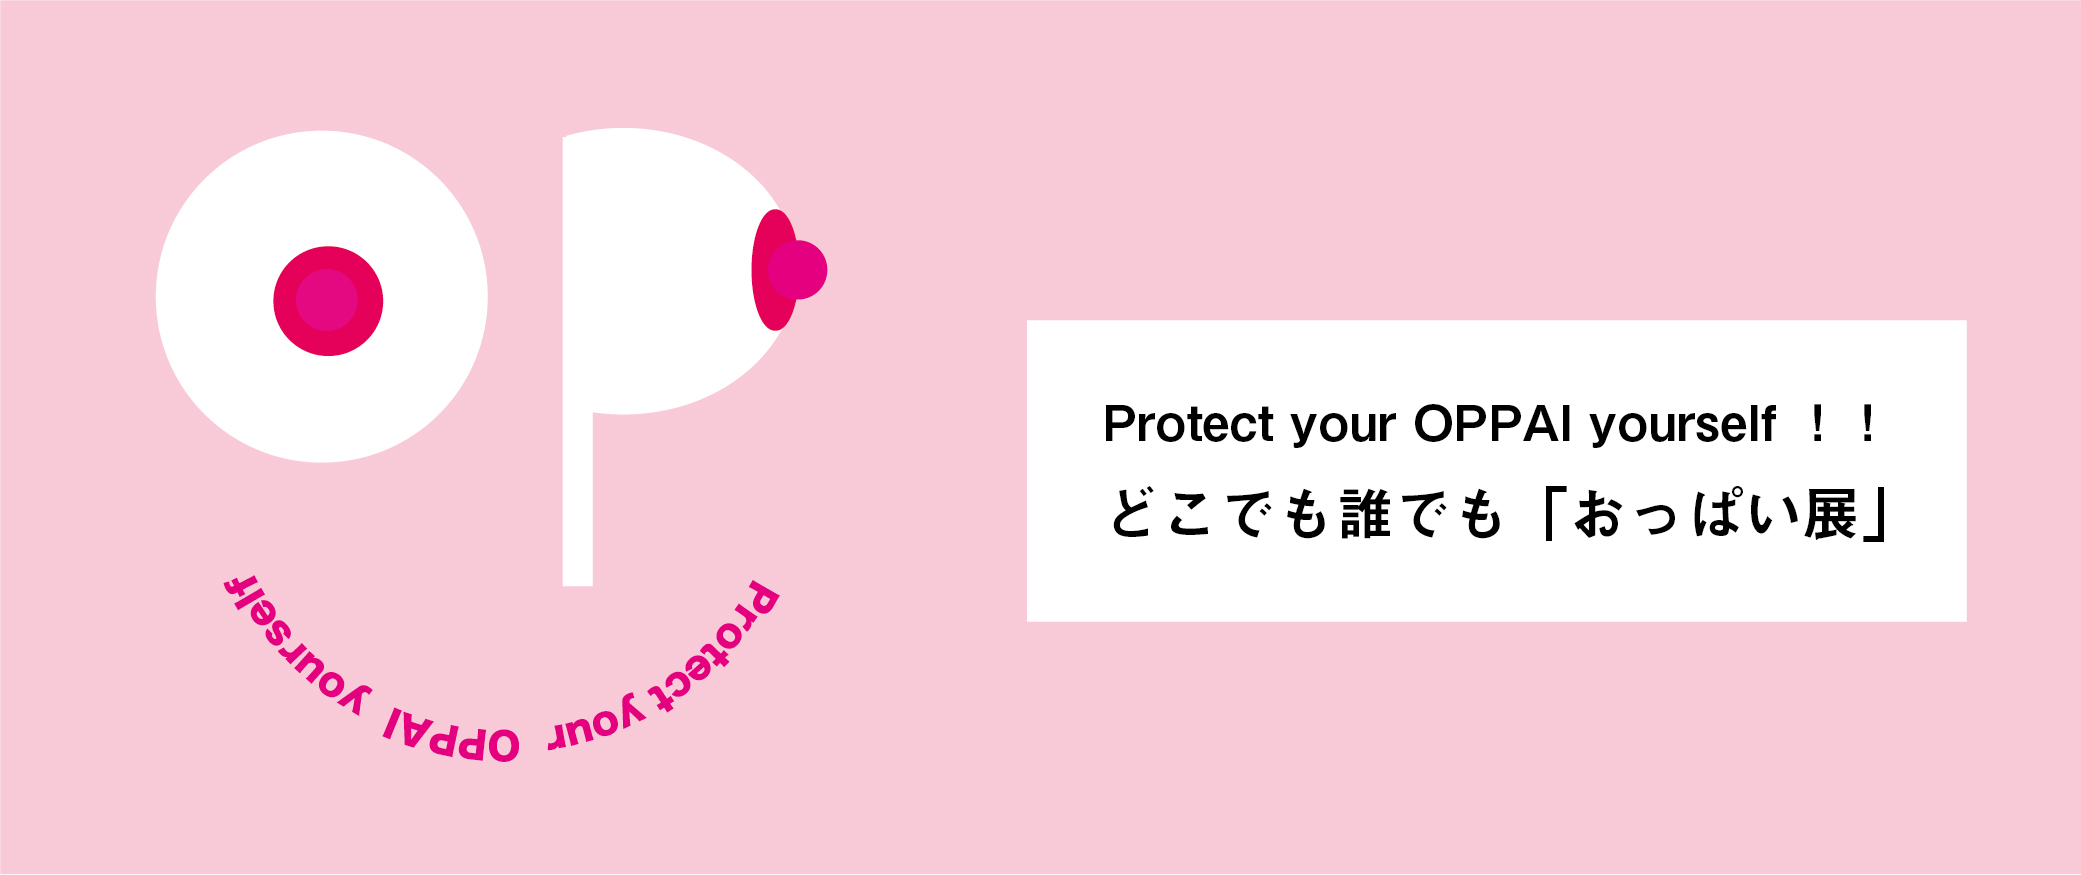 Protect your OPPAI yourself ！！！ どこでも誰でも「おっぱい展」キャンペーン実施